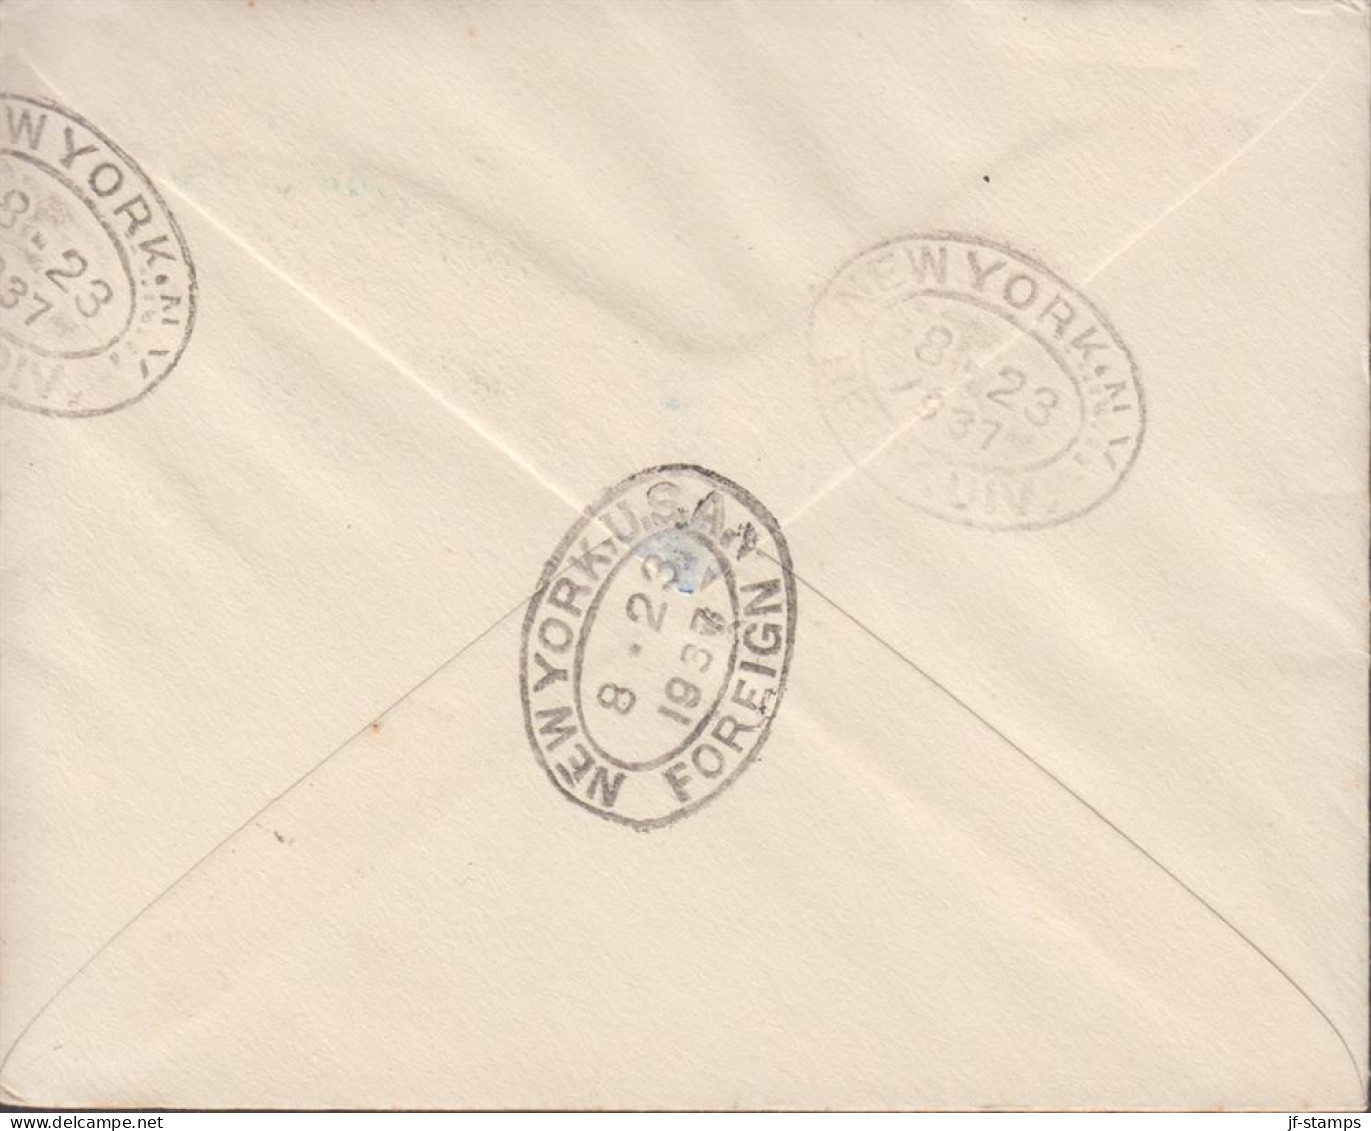 1937. TURKS & CAICOS ISLANDS. Georg VI Coronation Complete Set On Small Cover To London. (Michel  115-117) - JF432576 - Turks & Caicos